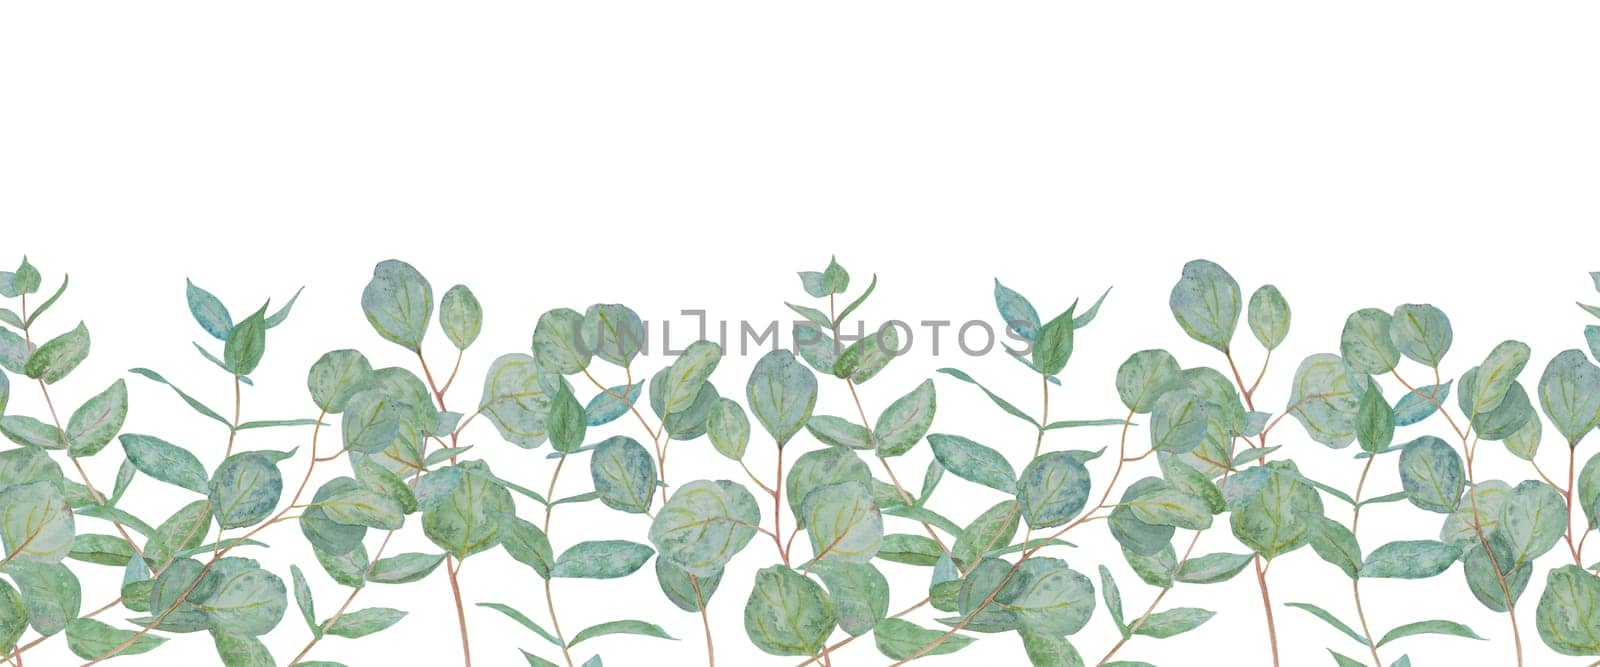 Watercolor seamless border of mint green eucalyptus branches. Hand drawn floral illustration for wedding invitations, print products, floristic, beauty salon. Clip art for greeting, print, lable, card.